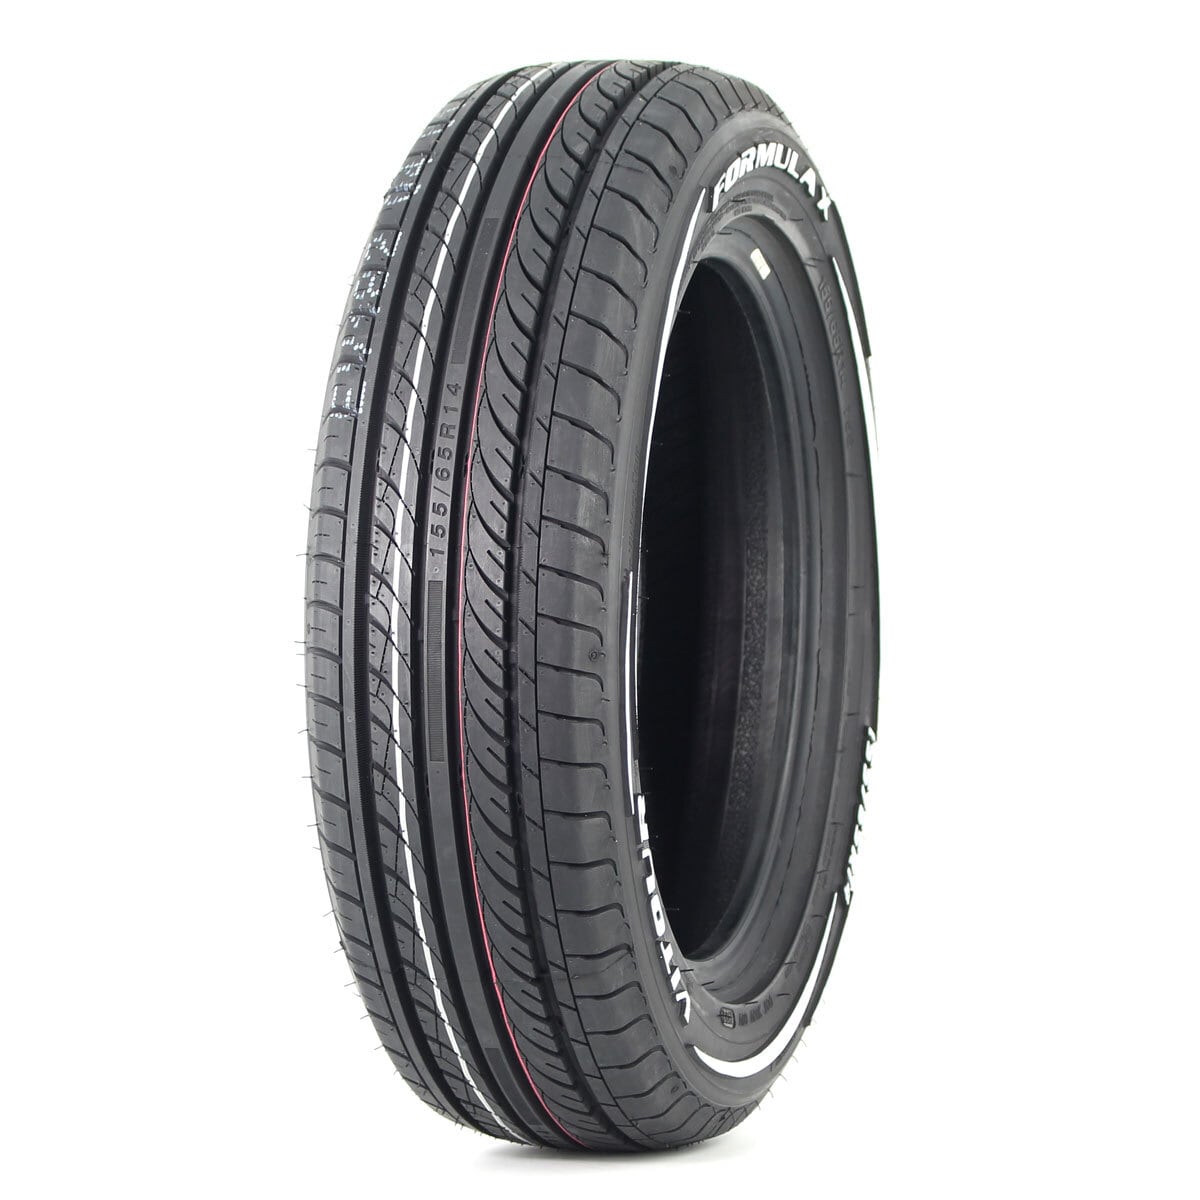 215/65R16 FORMULA X RWL-WSW【送料無料】 | VITOUR TIRE OFFICIAL ...